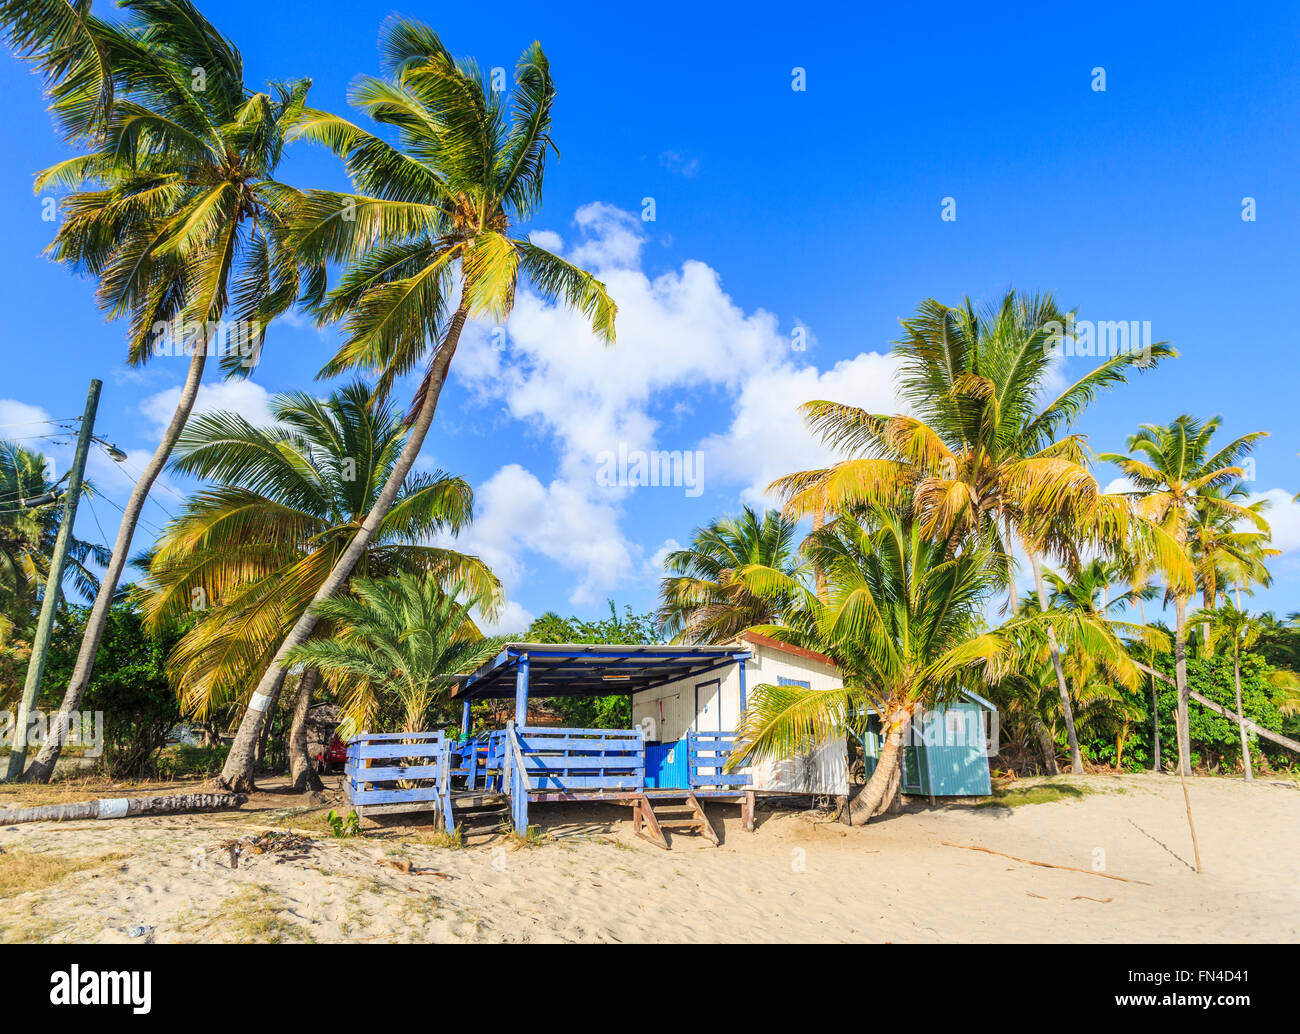 Wooden shack on sandy beach at Carlisle Bay, south-west Antigua, Antigua and Barbuda, West Indies with palm trees and blue sky Stock Photo